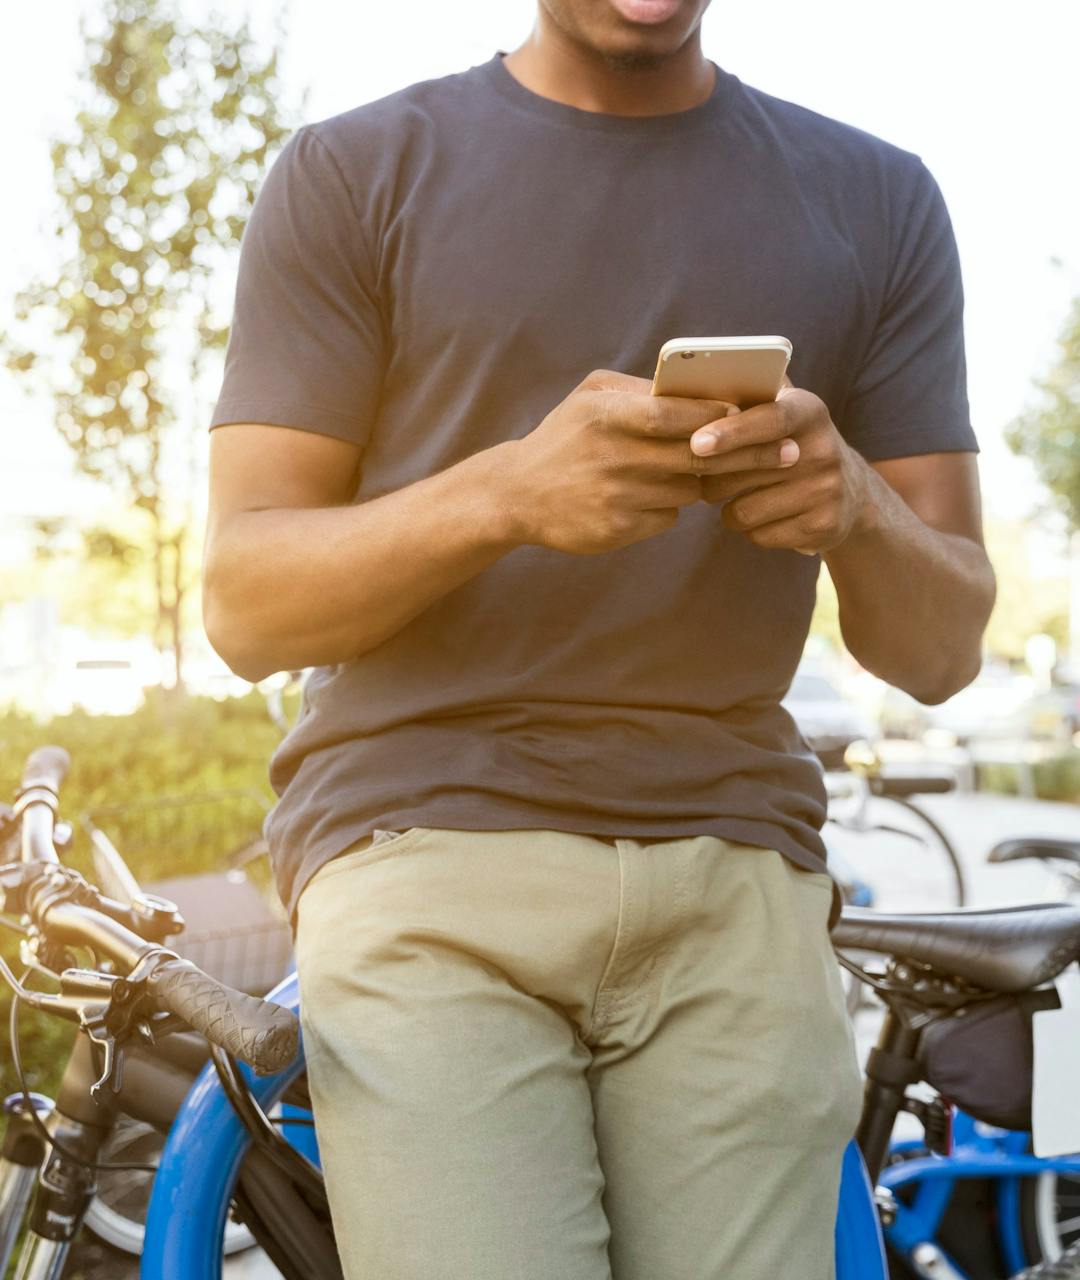 Person on their phone leaning against a bike